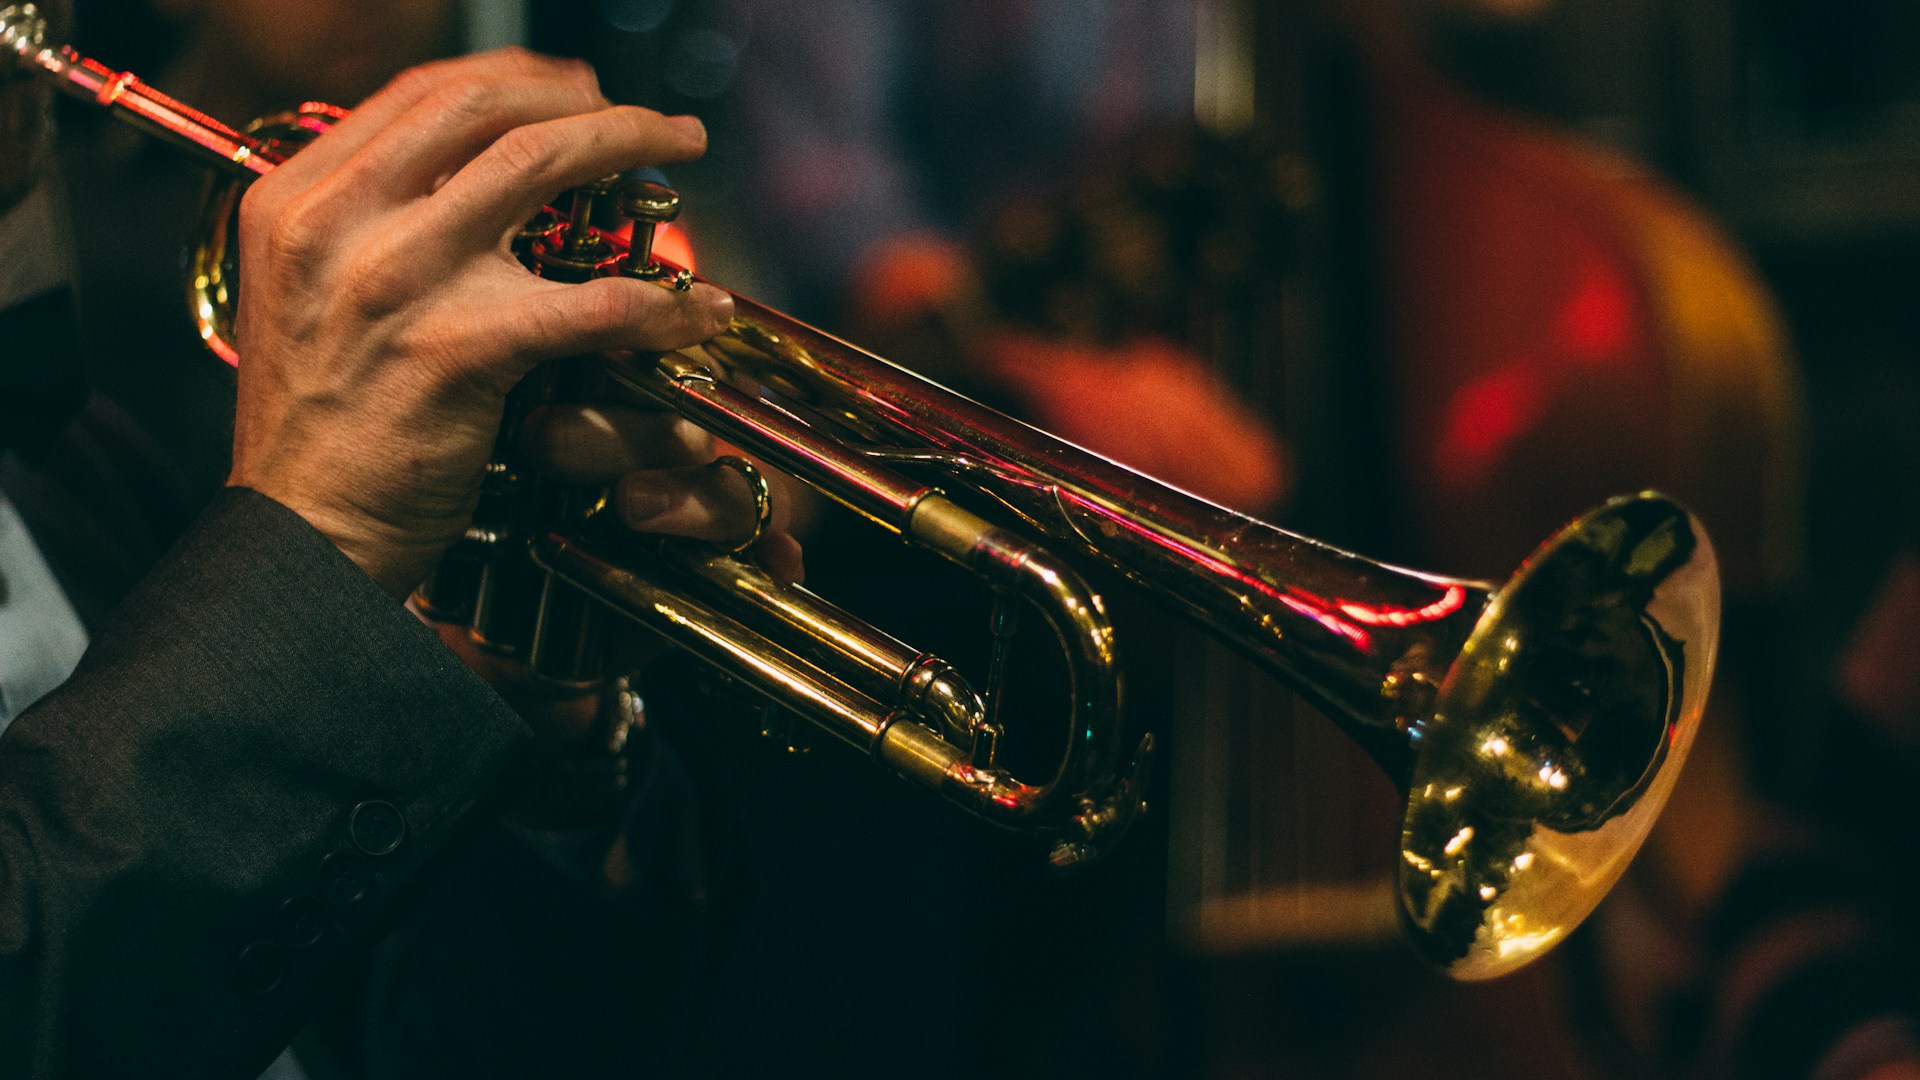 A person playing a trumpet in a jazz lounge